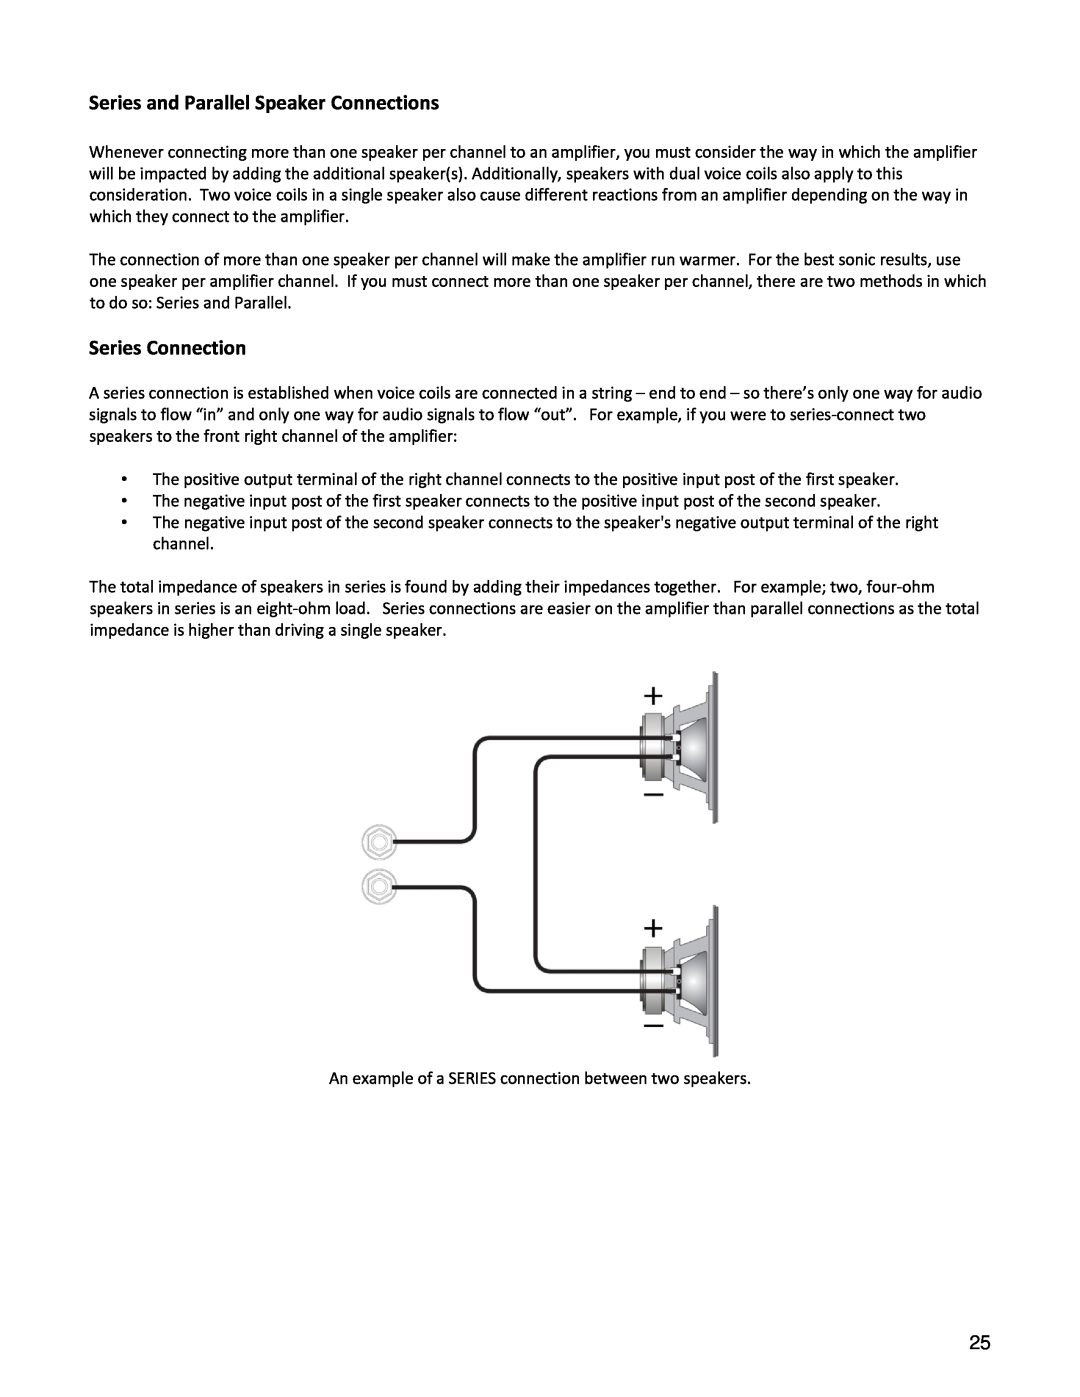 Emotiva UPA-1, UPA-5 manual Series and Parallel Speaker Connections, Series Connection 